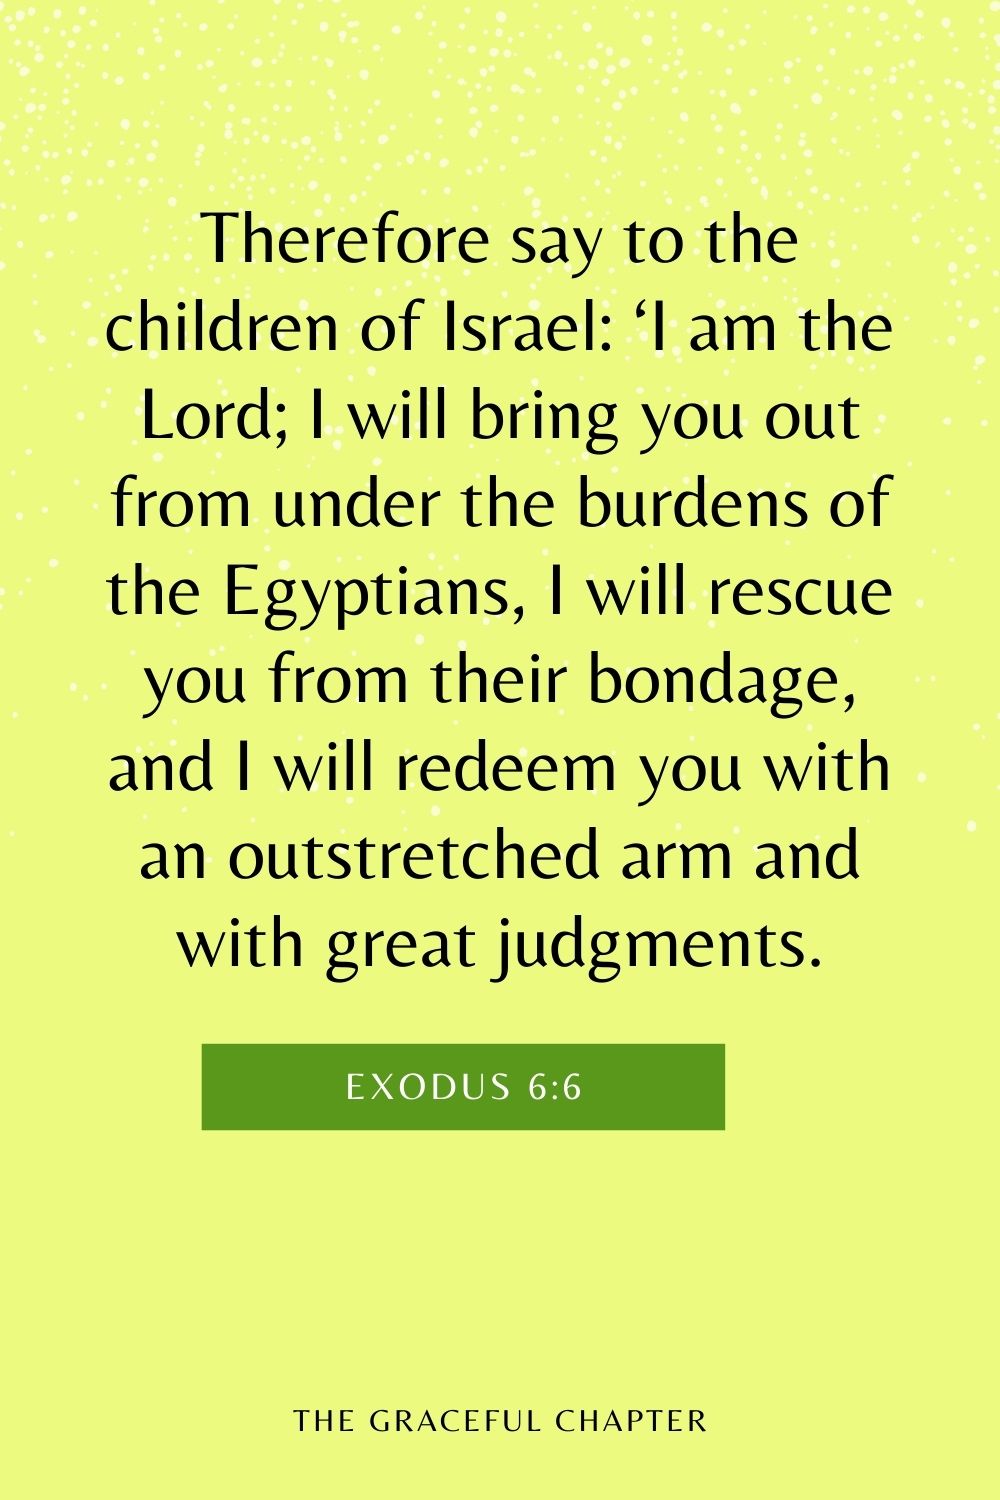 Therefore say to the children of Israel: ‘I am the Lord; I will bring you out from under the burdens of the Egyptians, I will rescue you from their bondage, and I will redeem you with an outstretched arm and with great judgments. Exodus 6:6